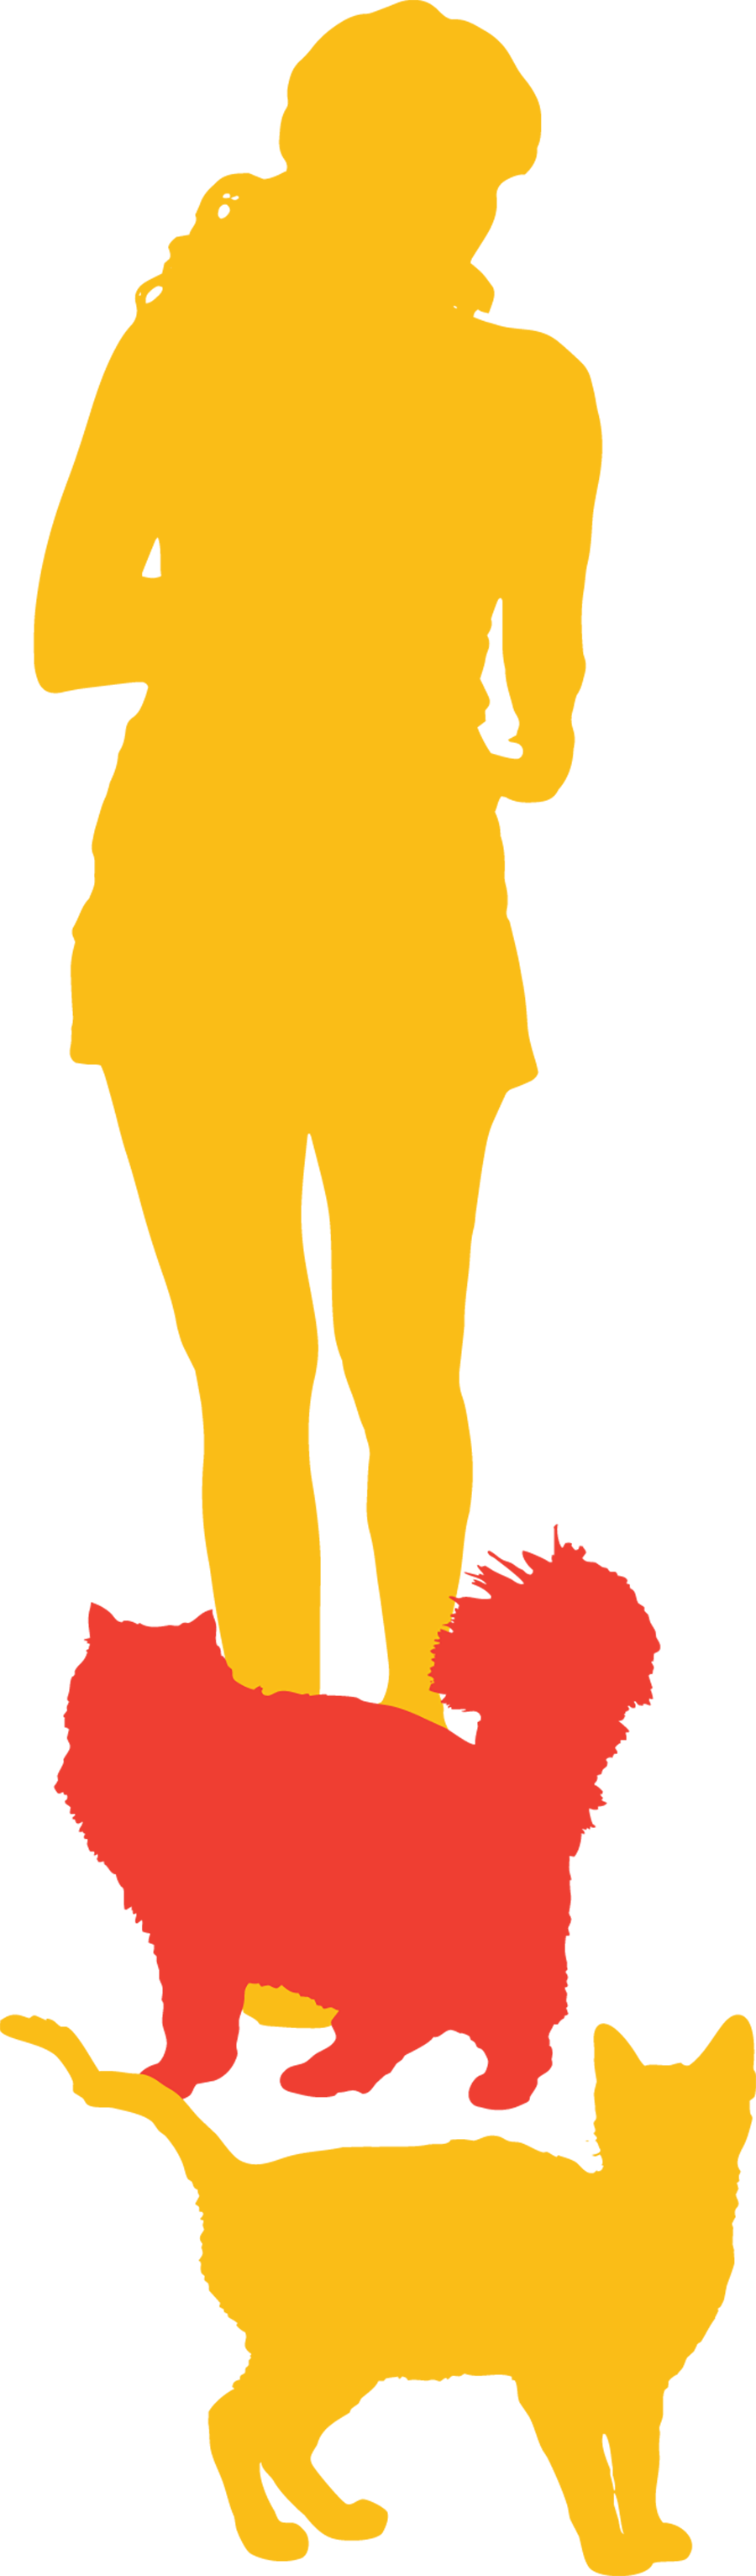 An illustrative silhouette representation of a yellow colored woman hovering on top of/floating above a red colored cat and a yellow colored cat